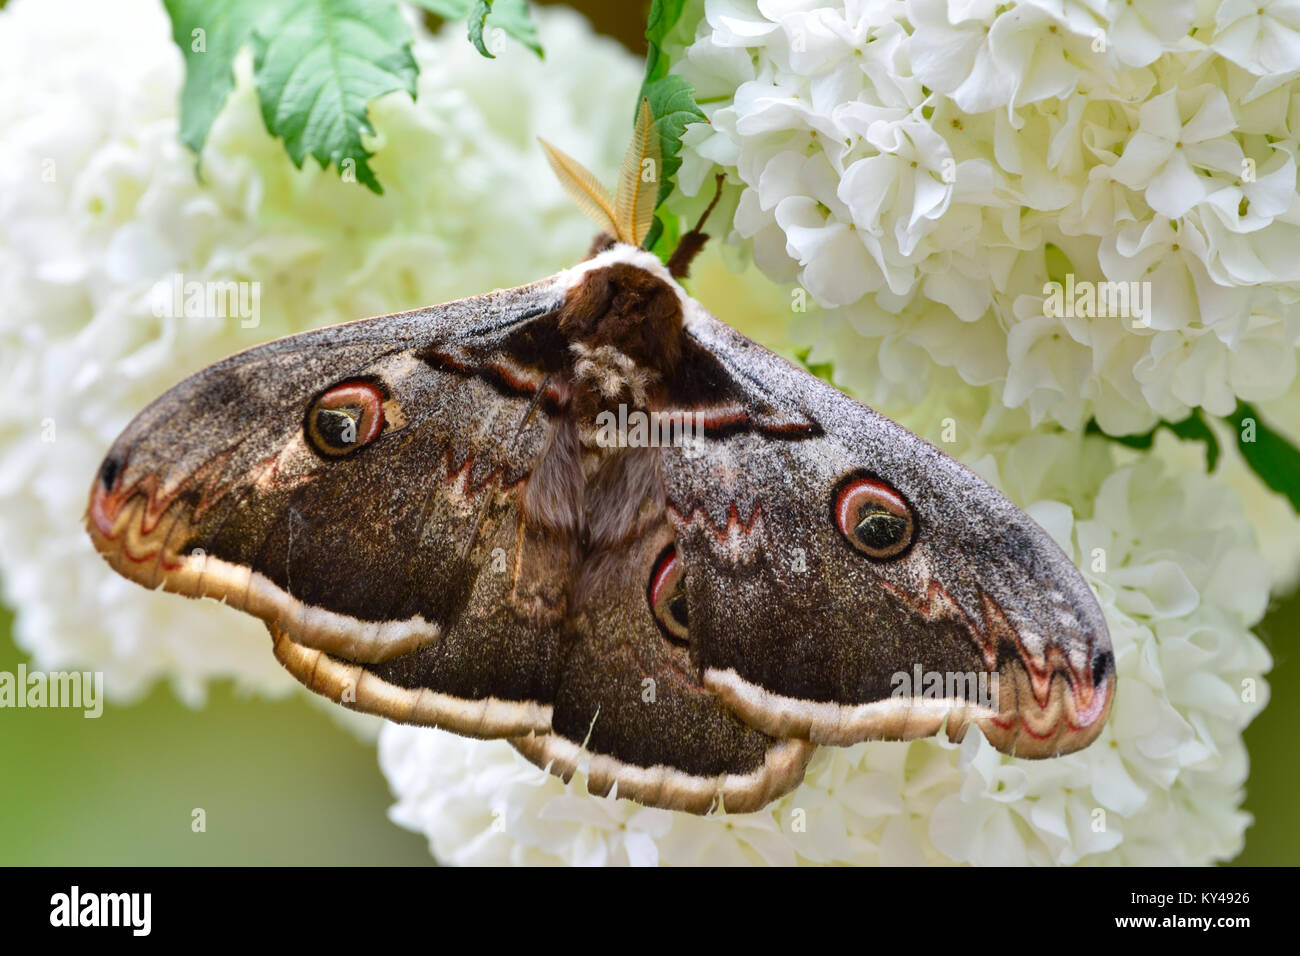 The Giant Peacock Moth (Saturnia pyri) on White Flower, the largest moth in Europe Stock Photo